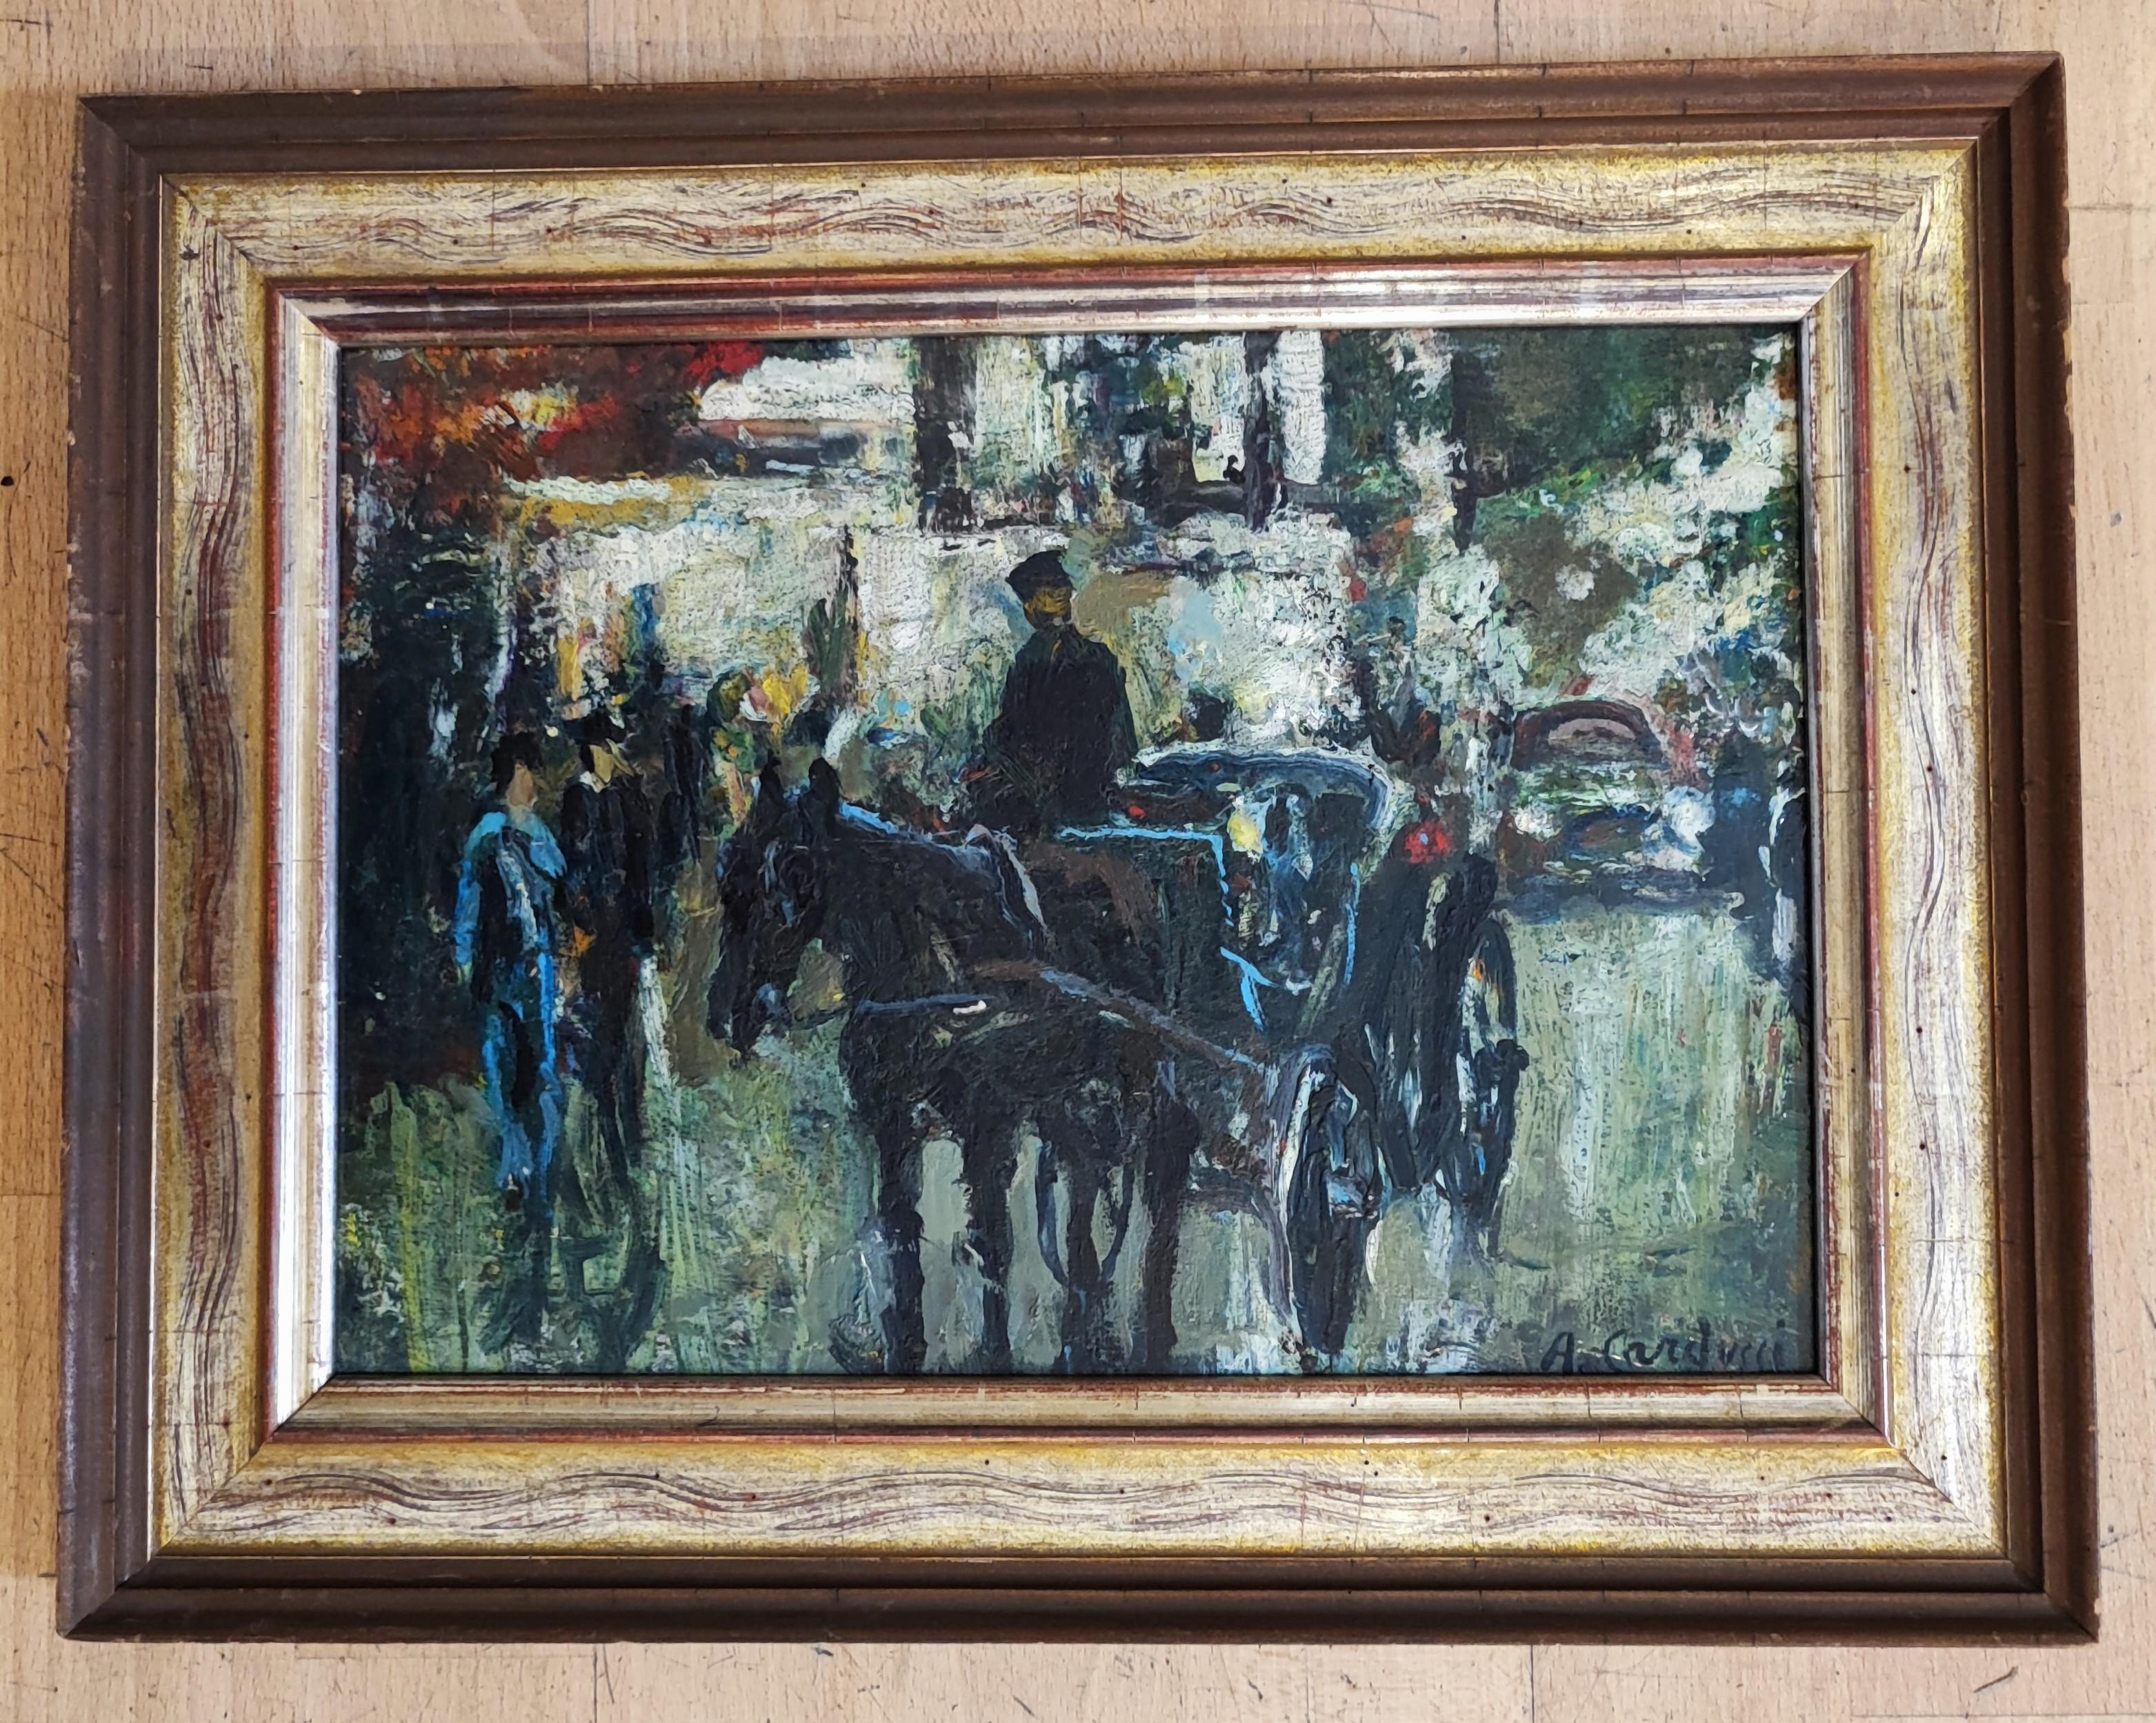 Carriage - Painting by Adolfo Carducci